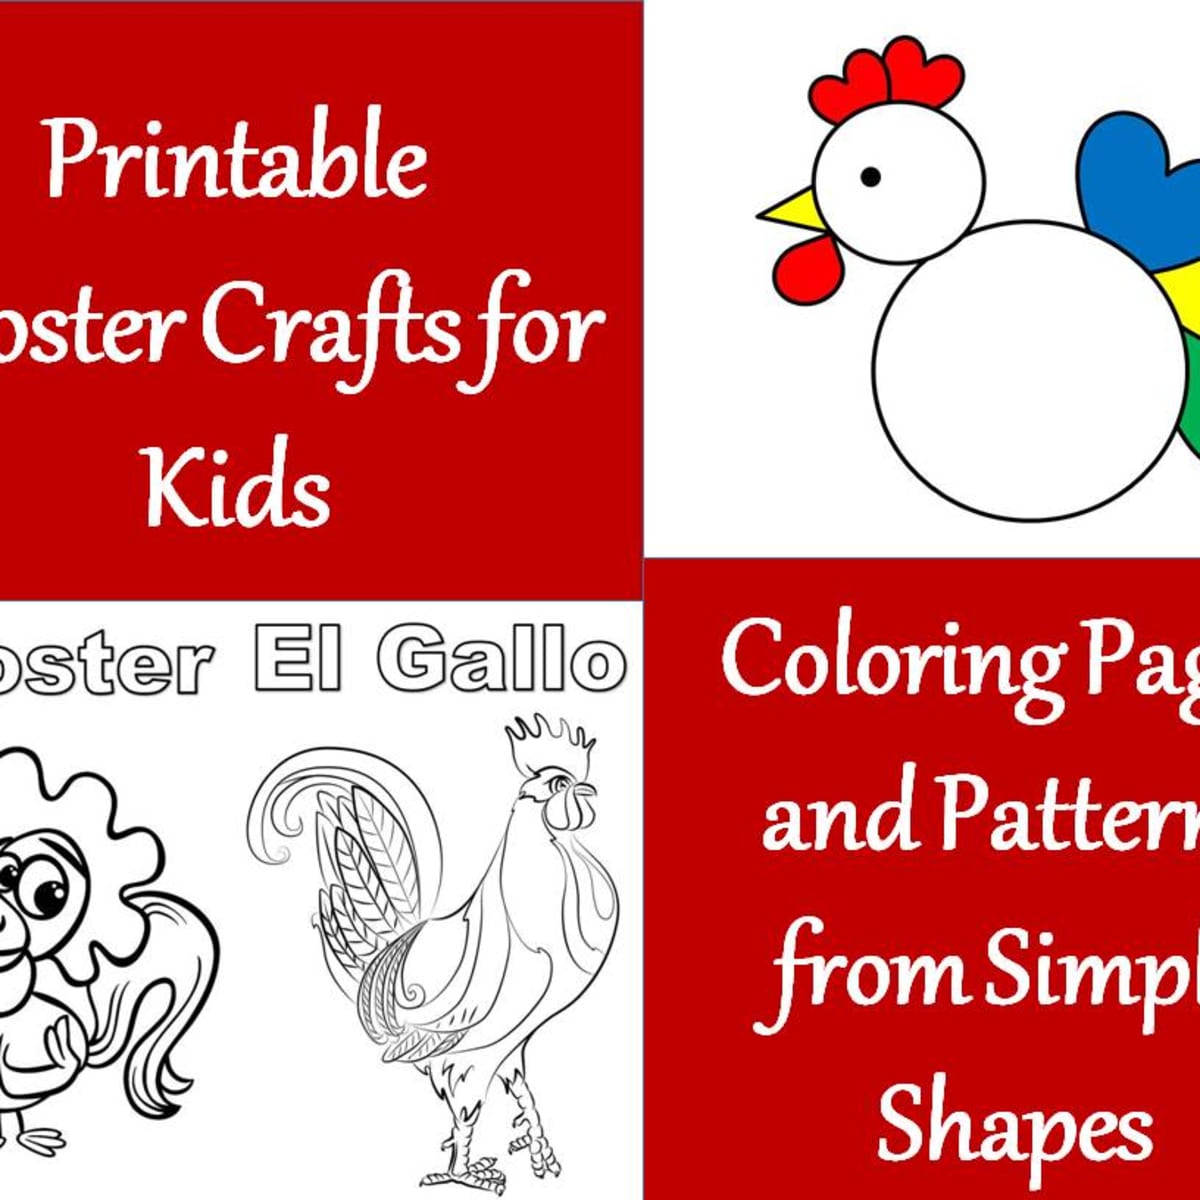 Printable Rooster Crafts for Kids   WeHaveKids